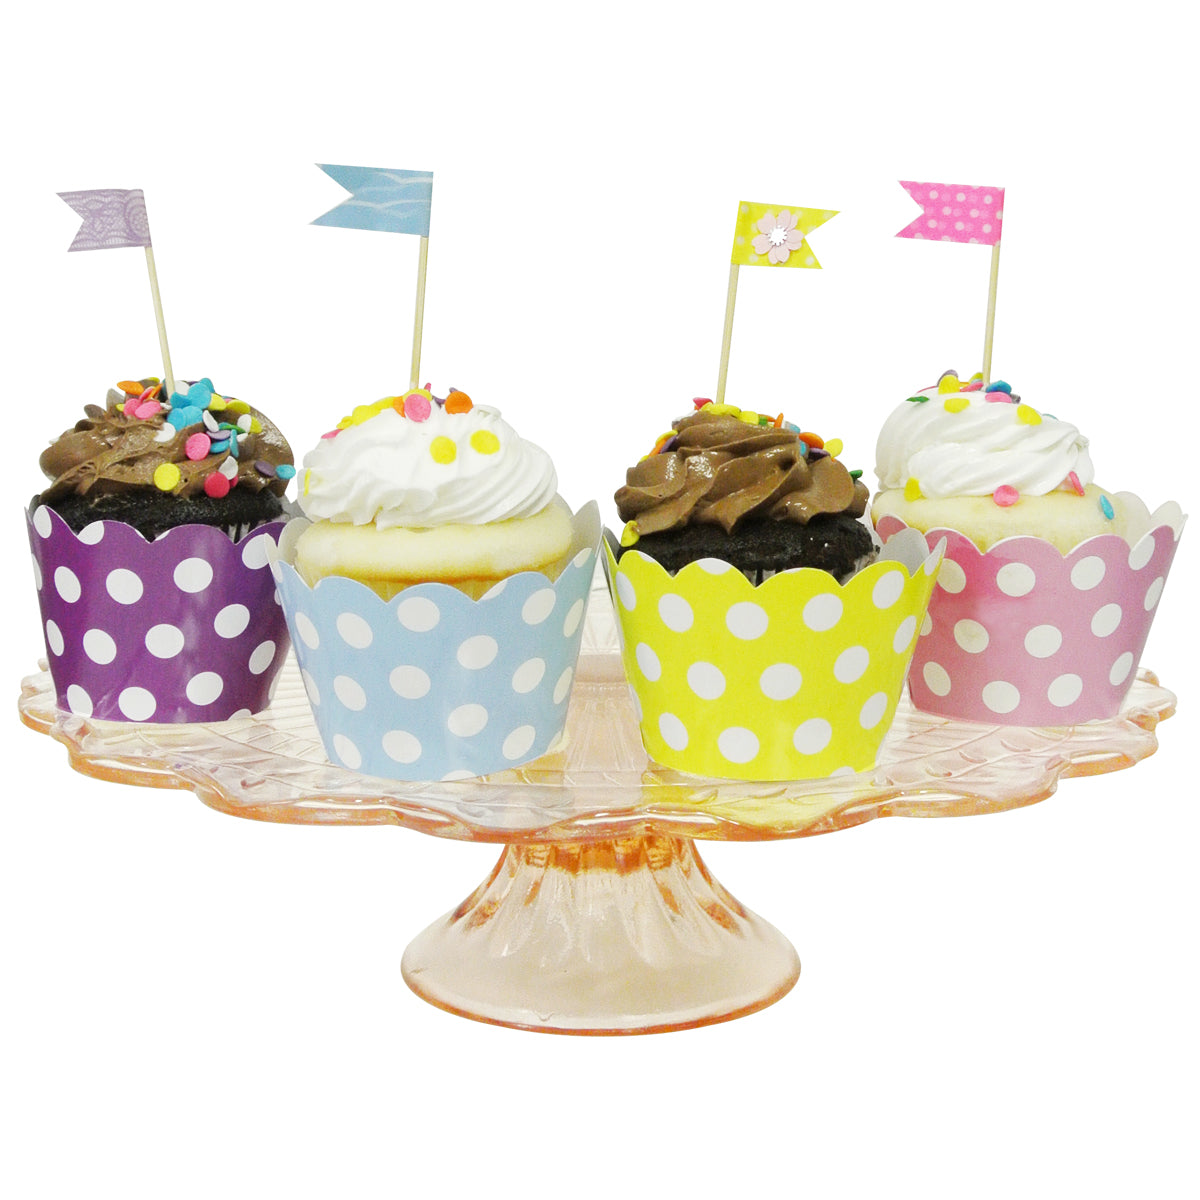 Wrapables Standard Size Polka Dots Cupcake Wrappers (Set of 20)